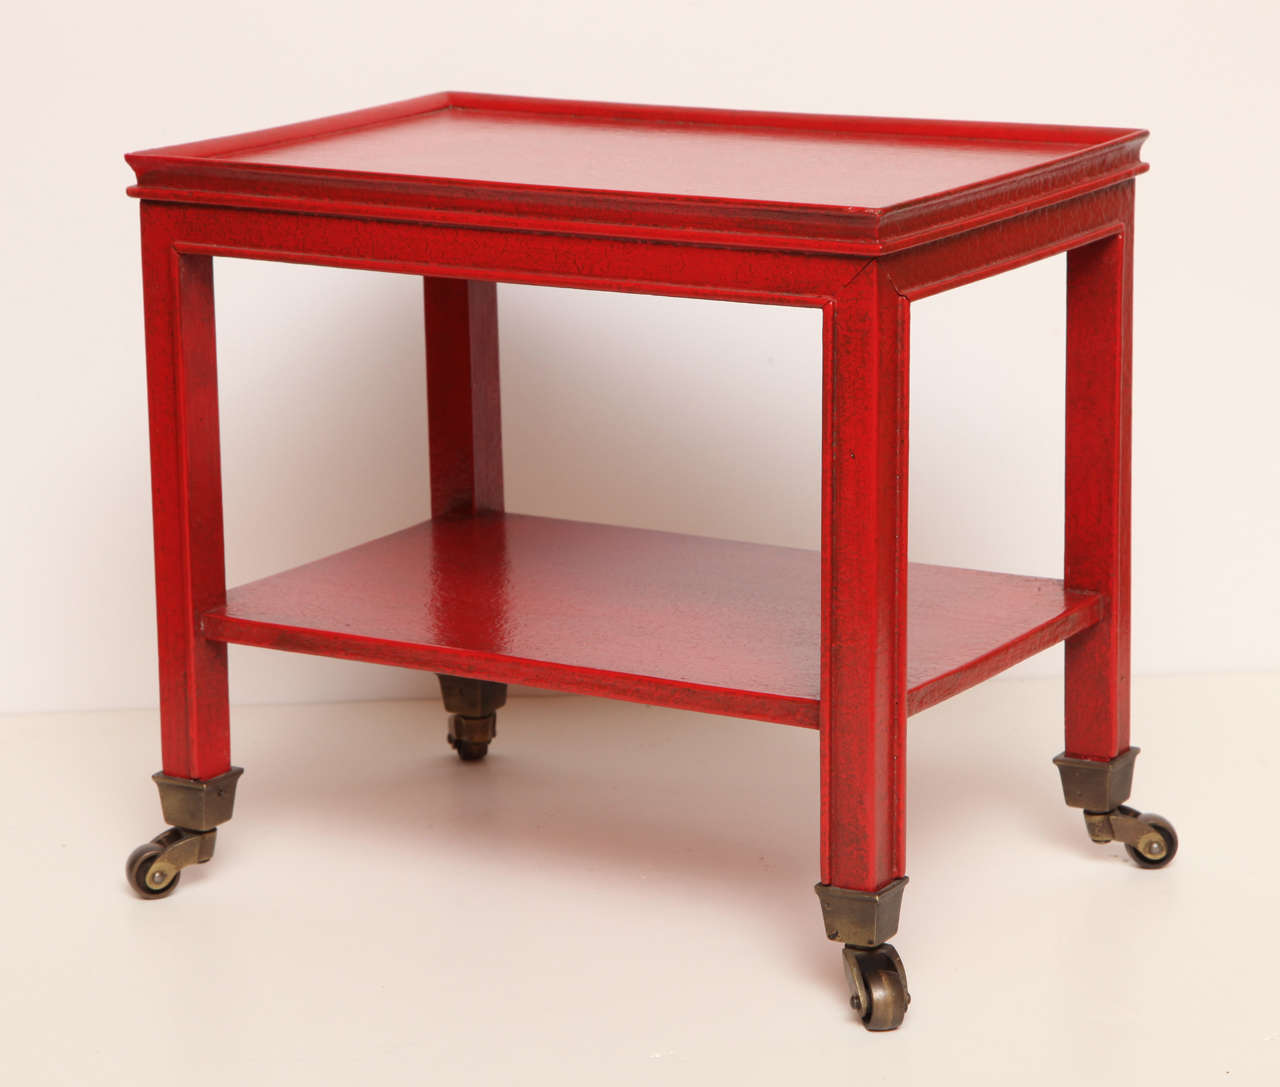 A telephone table by Jansen with a red faux-painted finish.